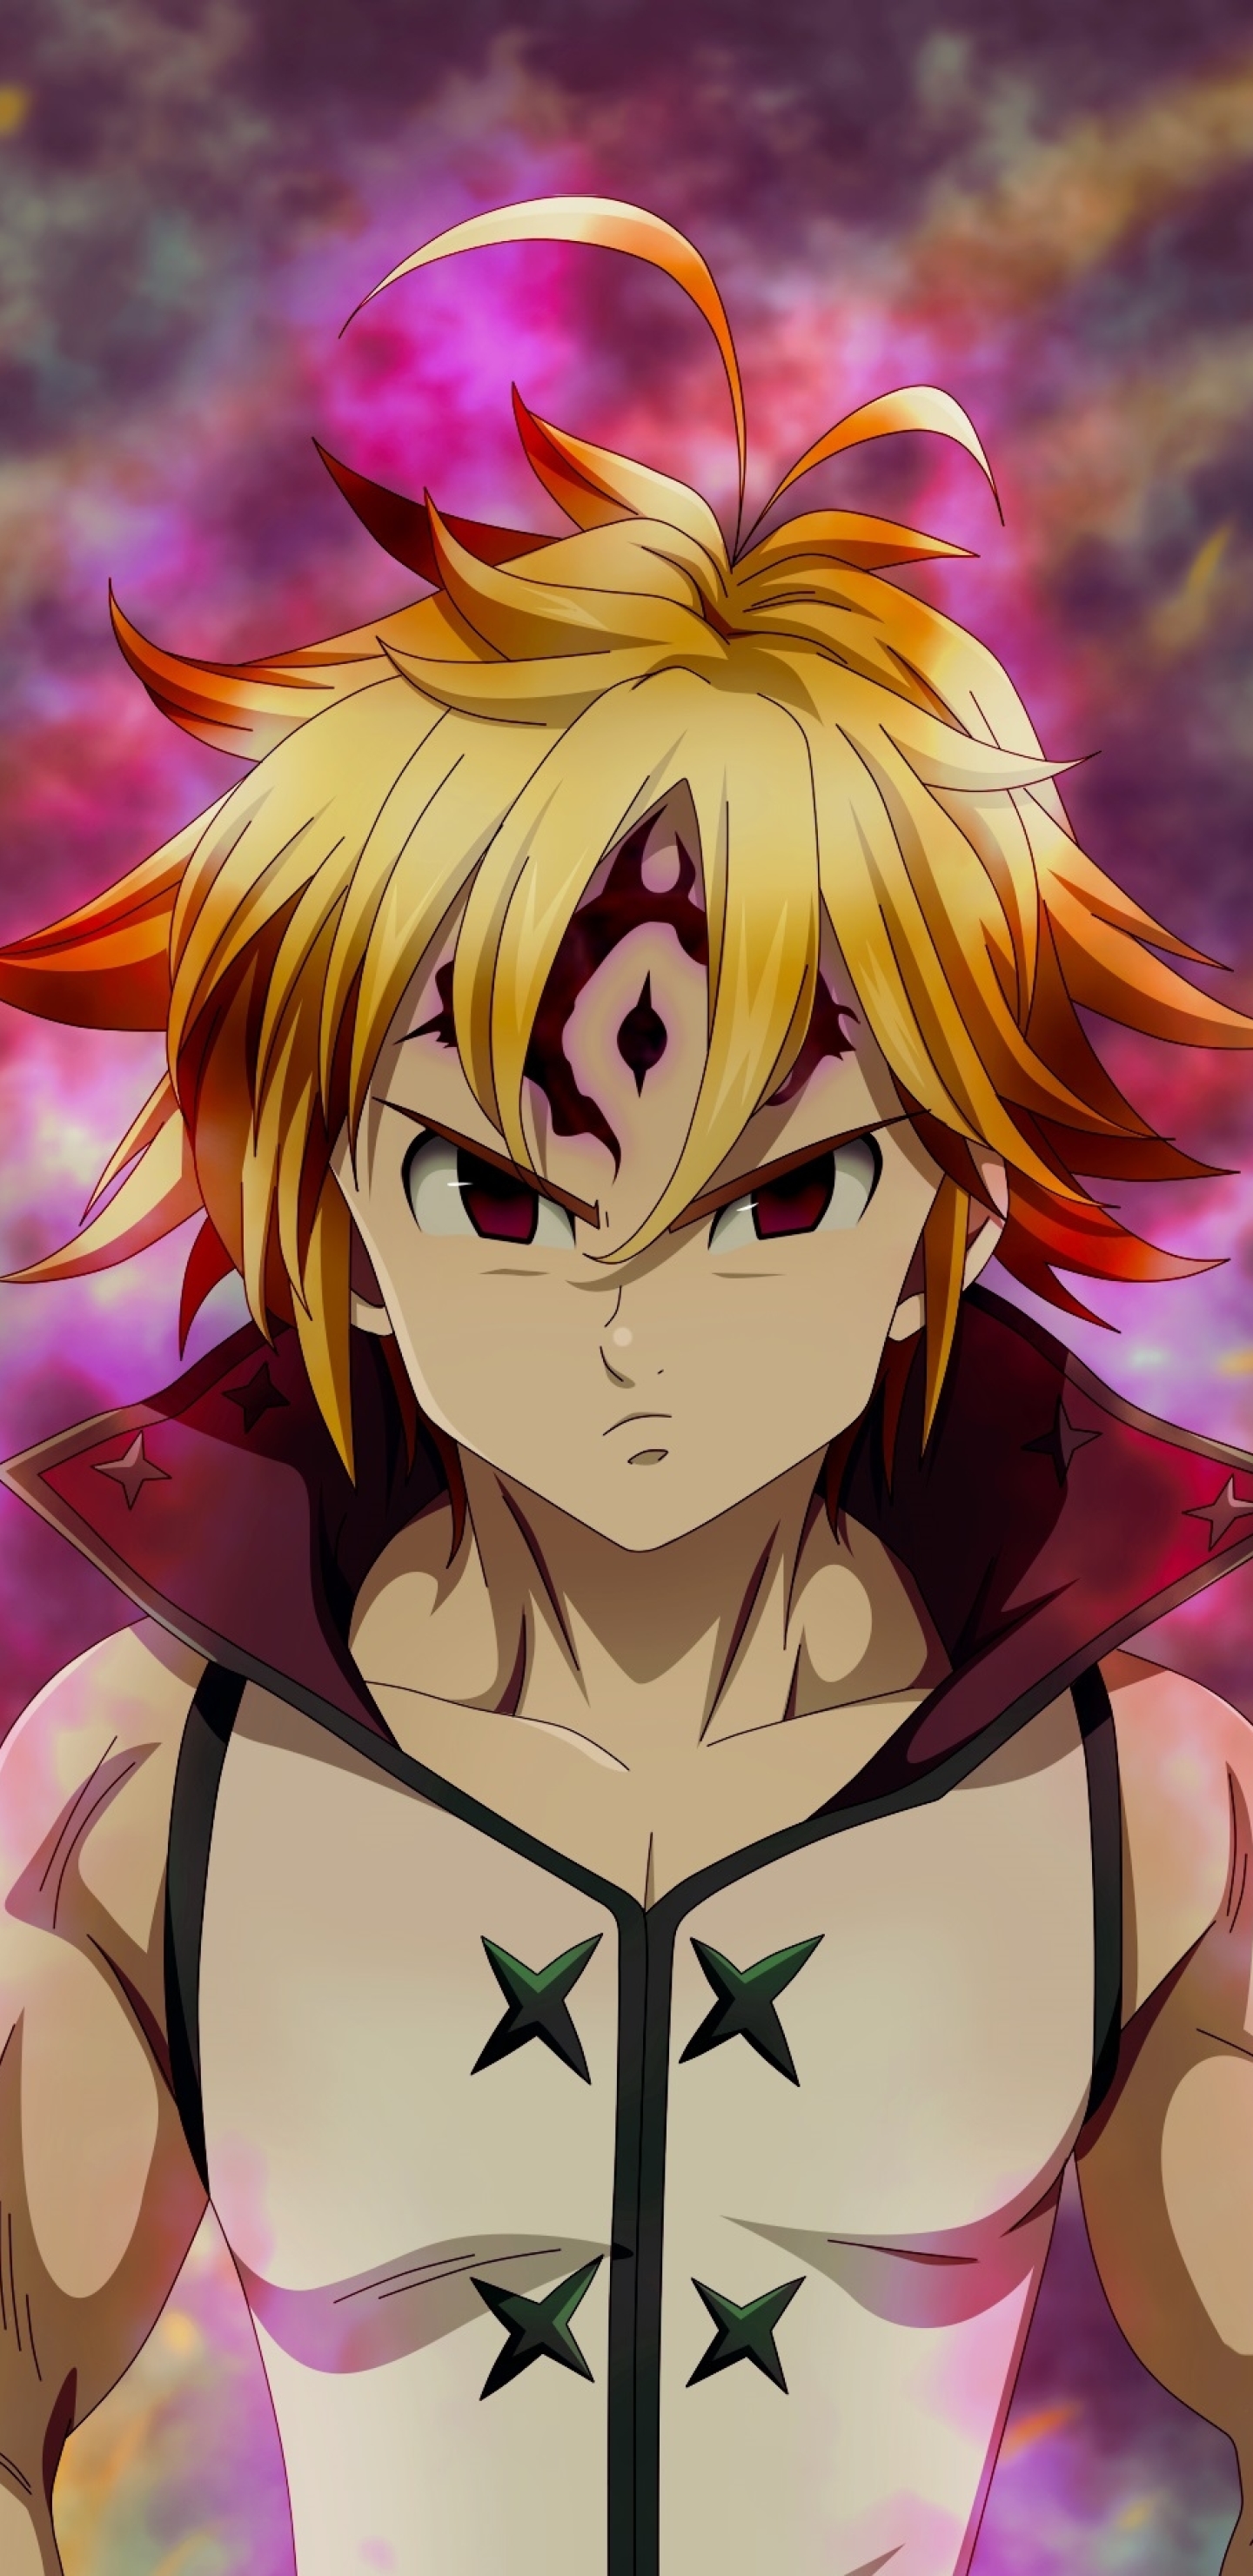 Seven Deadly Sins HD Android Wallpapers - Wallpaper Cave